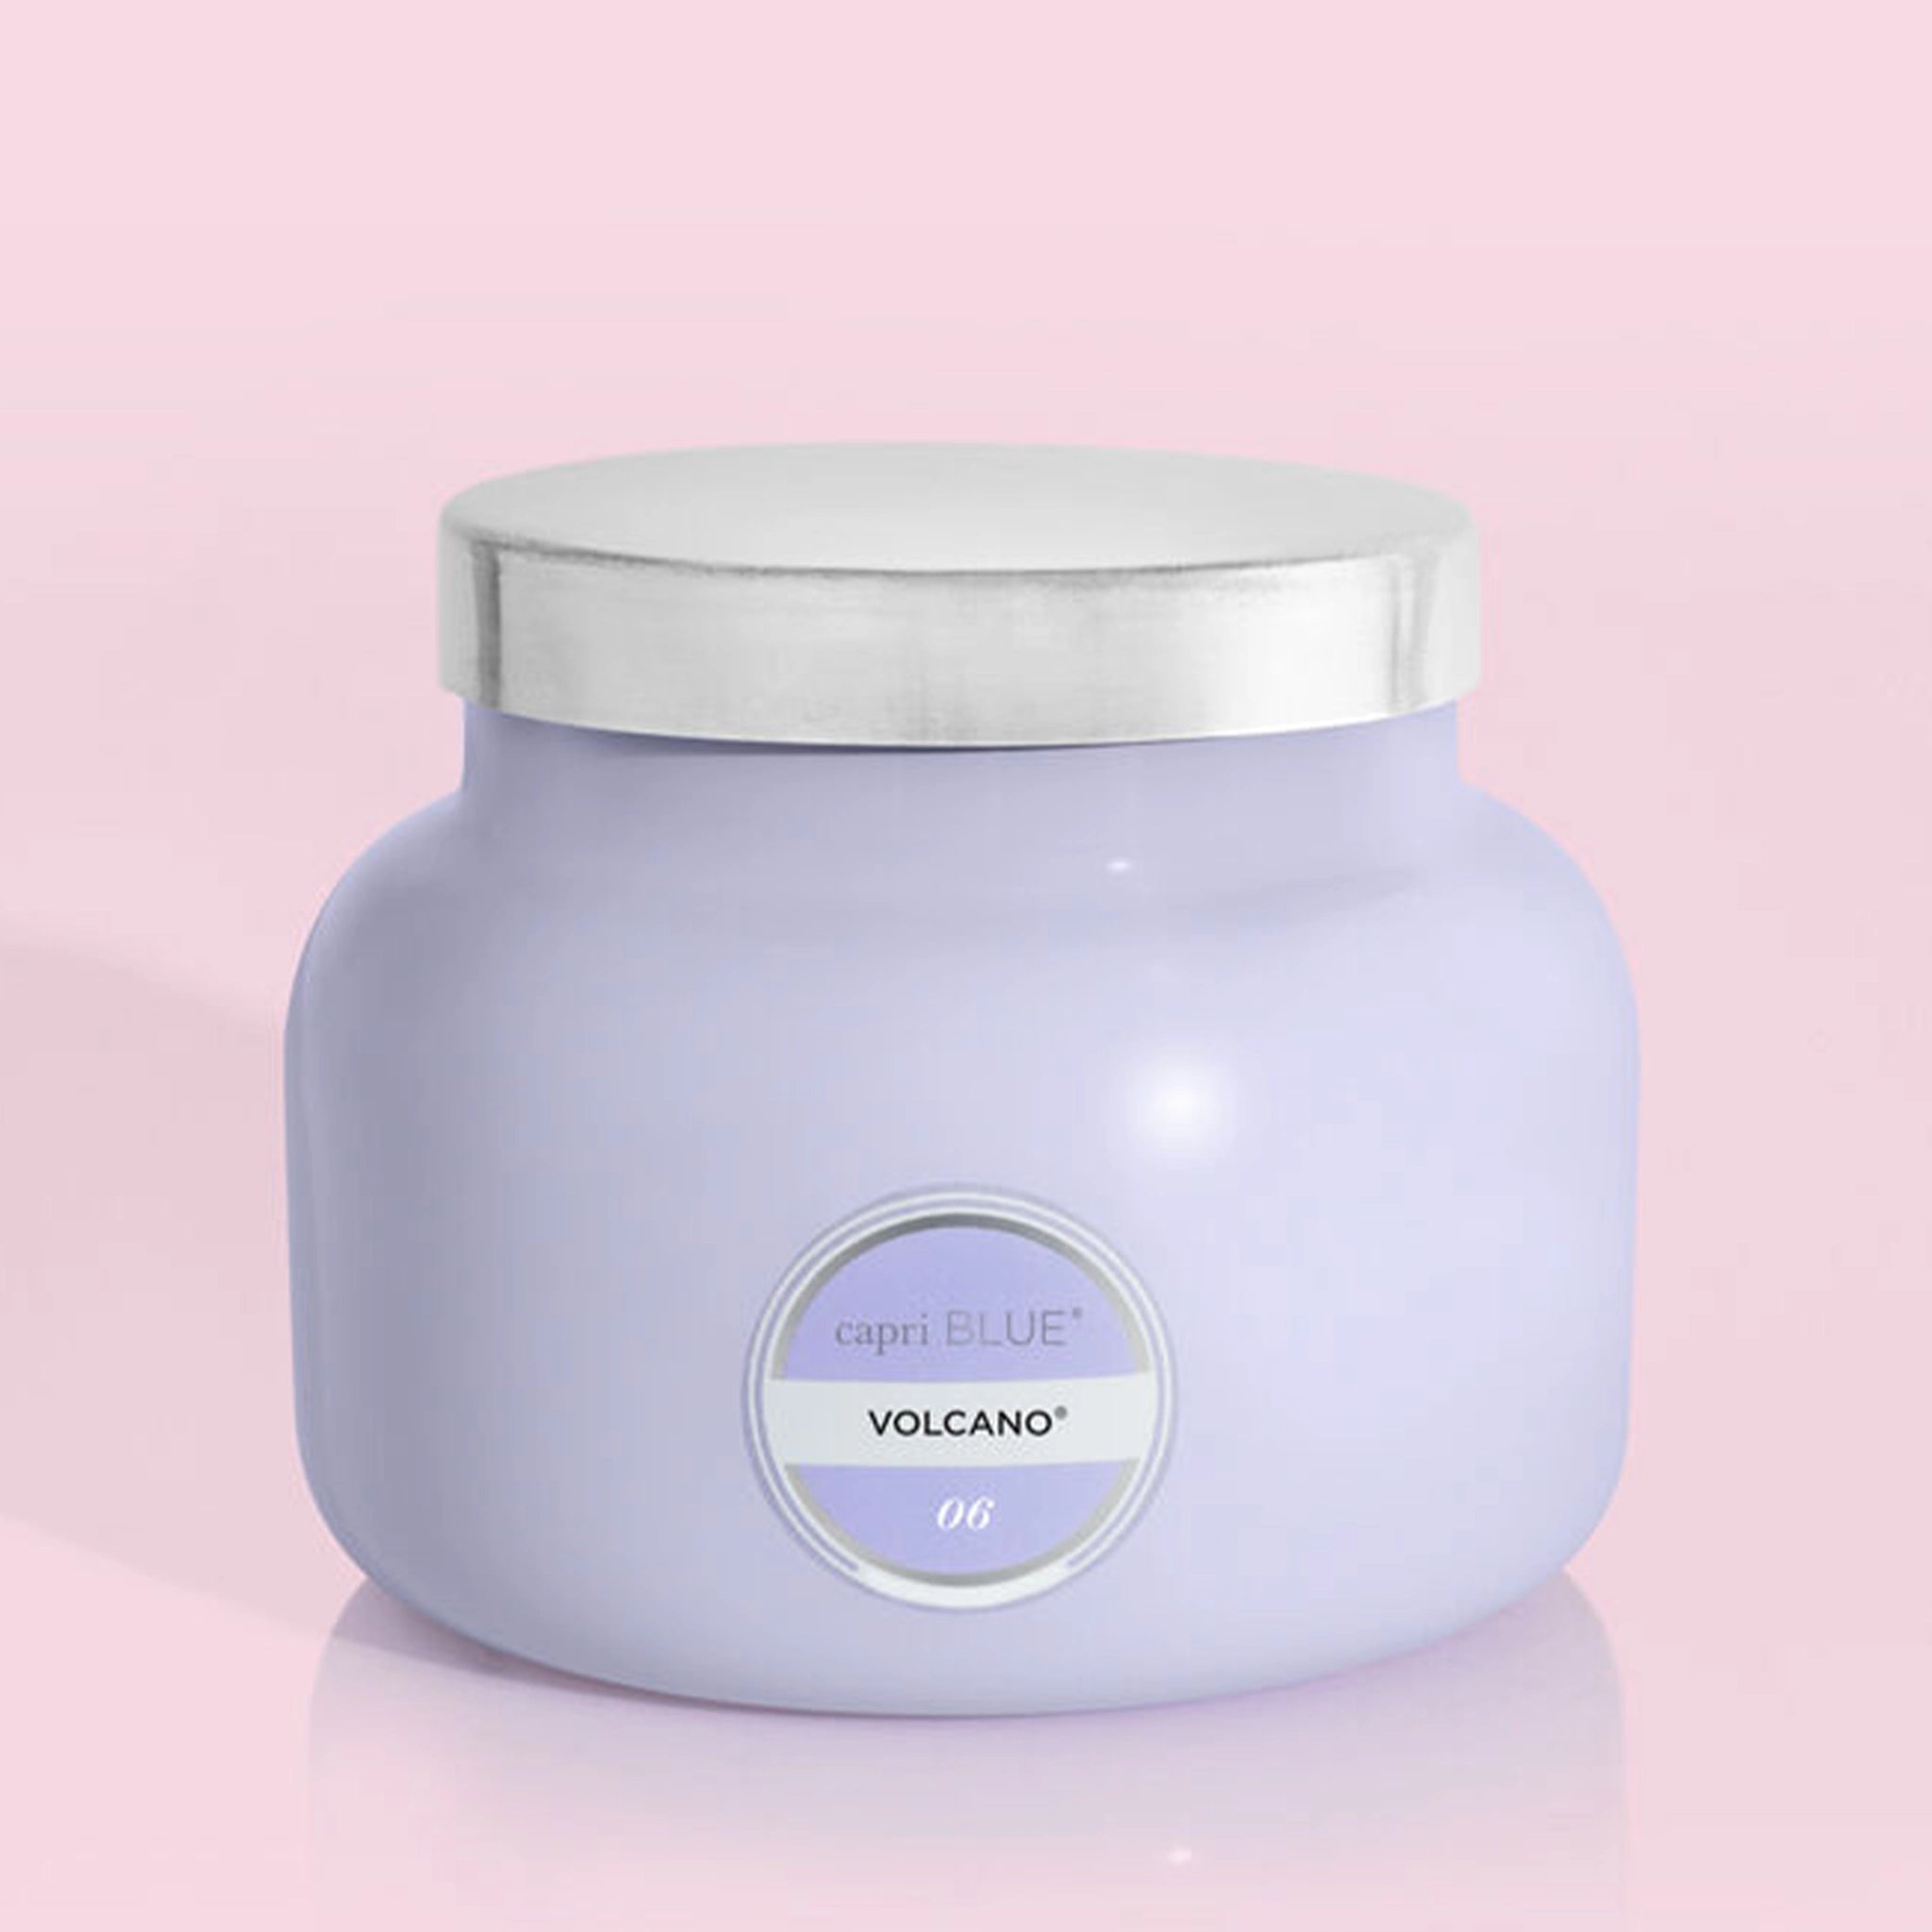 The larger of the two glass candle jars in a lavender purple shade along with a silver lid and a circle label in the center that reads, "Capri Blue, Volcano 06".